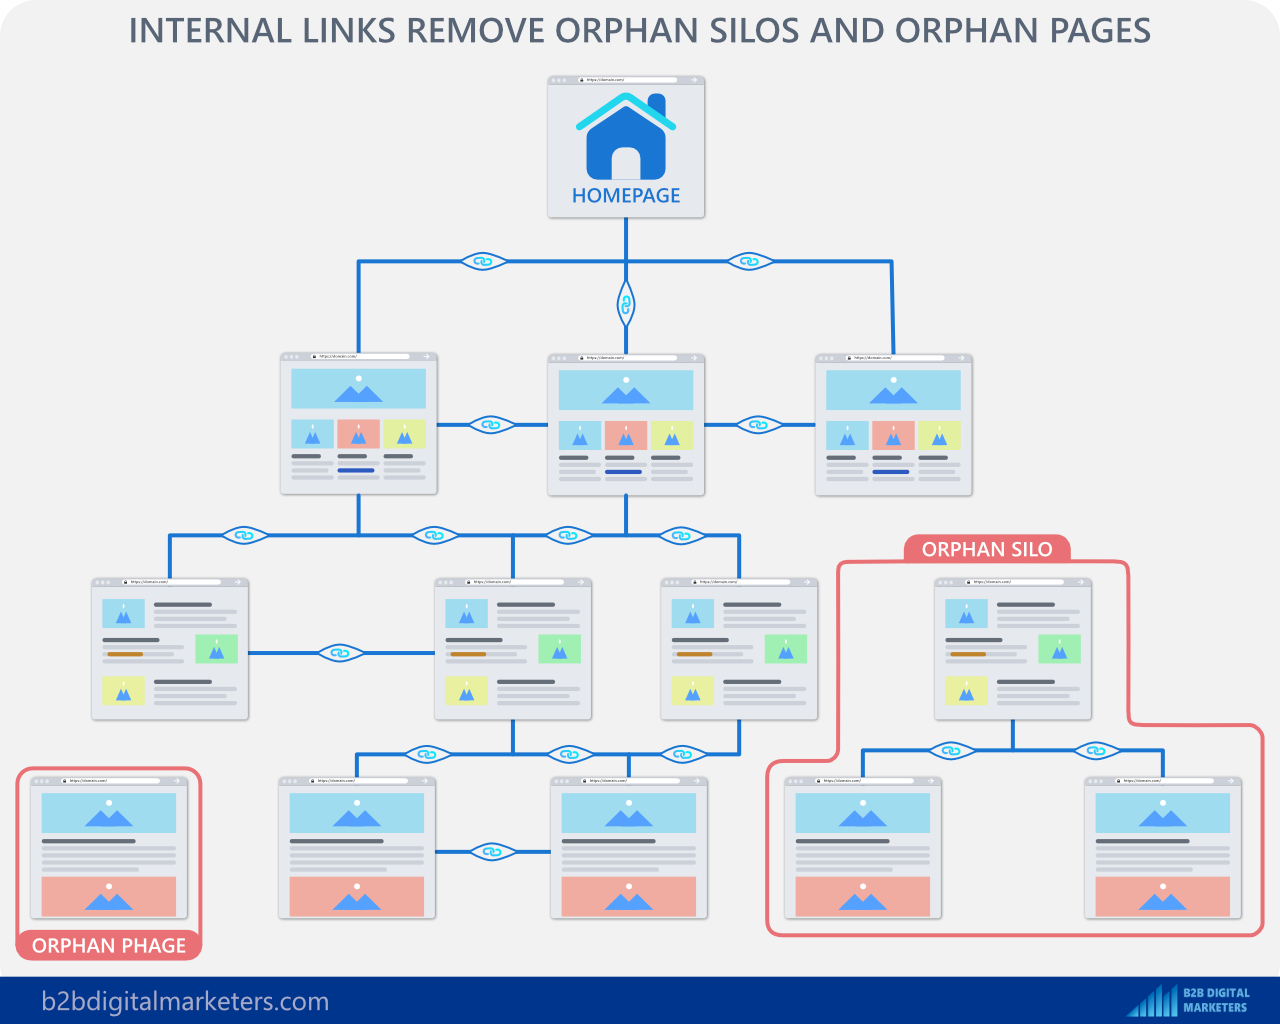 internal links will help you remove orphan pages and silo of orphan pages